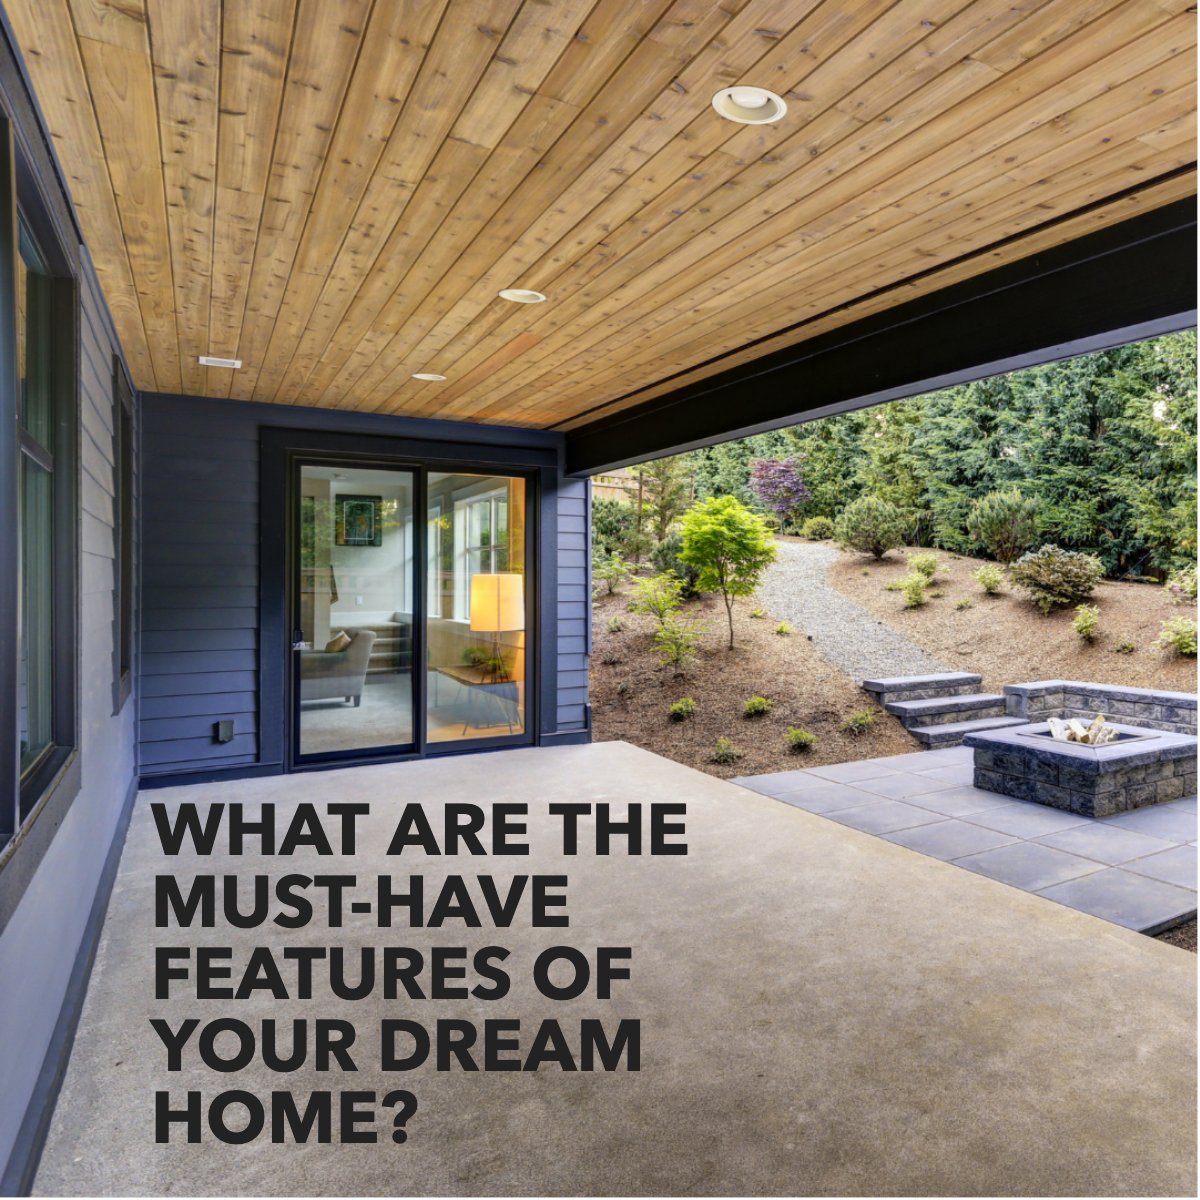 We all have our non-negotiables. What are the must-have features your dream home can't be without?

Let us know in the comments! 💭

#home #house #dreamhome #realestate #realtor #buy #sell
 #steveladrido #ladridoteam #theladridoteam #staughomes #staugustinerealestate